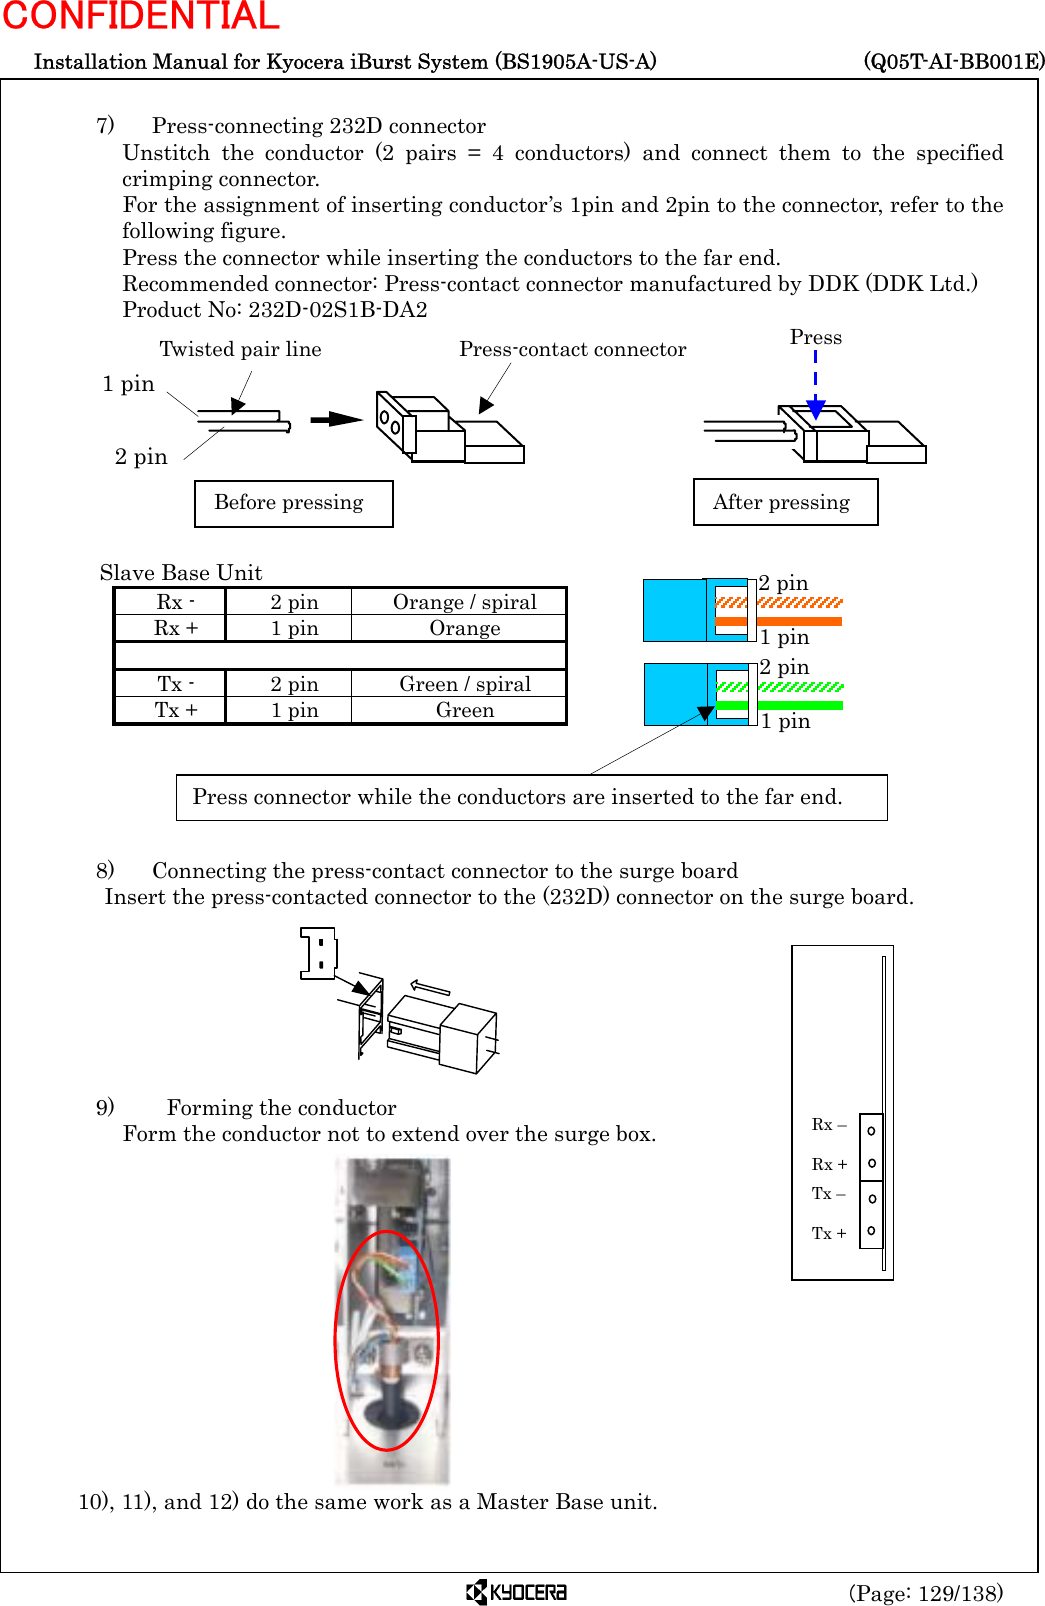  Installation Manual for Kyocera iBurst System (BS1905A-US-A)     (Q05T-AI-BB001E) (Page: 129/138) CONFIDENTIAL  7)    Press-connecting 232D connector Unstitch the conductor (2 pairs = 4 conductors) and connect them to the specified crimping connector. For the assignment of inserting conductor’s 1pin and 2pin to the connector, refer to the following figure. Press the connector while inserting the conductors to the far end. Recommended connector: Press-contact connector manufactured by DDK (DDK Ltd.) Product No: 232D-02S1B-DA2                Slave Base Unit Rx -  2 pin  Orange / spiral Rx +  1 pin  Orange     Tx -  2 pin  Green / spiral Tx +  1 pin  Green      8)   Connecting the press-contact connector to the surge board Insert the press-contacted connector to the (232D) connector on the surge board.        9)    Forming the conductor Form the conductor not to extend over the surge box.              10), 11), and 12) do the same work as a Master Base unit.   Tx –  Tx + Rx –  Rx + Twisted pair line Press-contact connector2 pin1 pinBefore pressing After pressingPress Press connector while the conductors are inserted to the far end. 1 pin 2 pin 1 pin 2 pin 